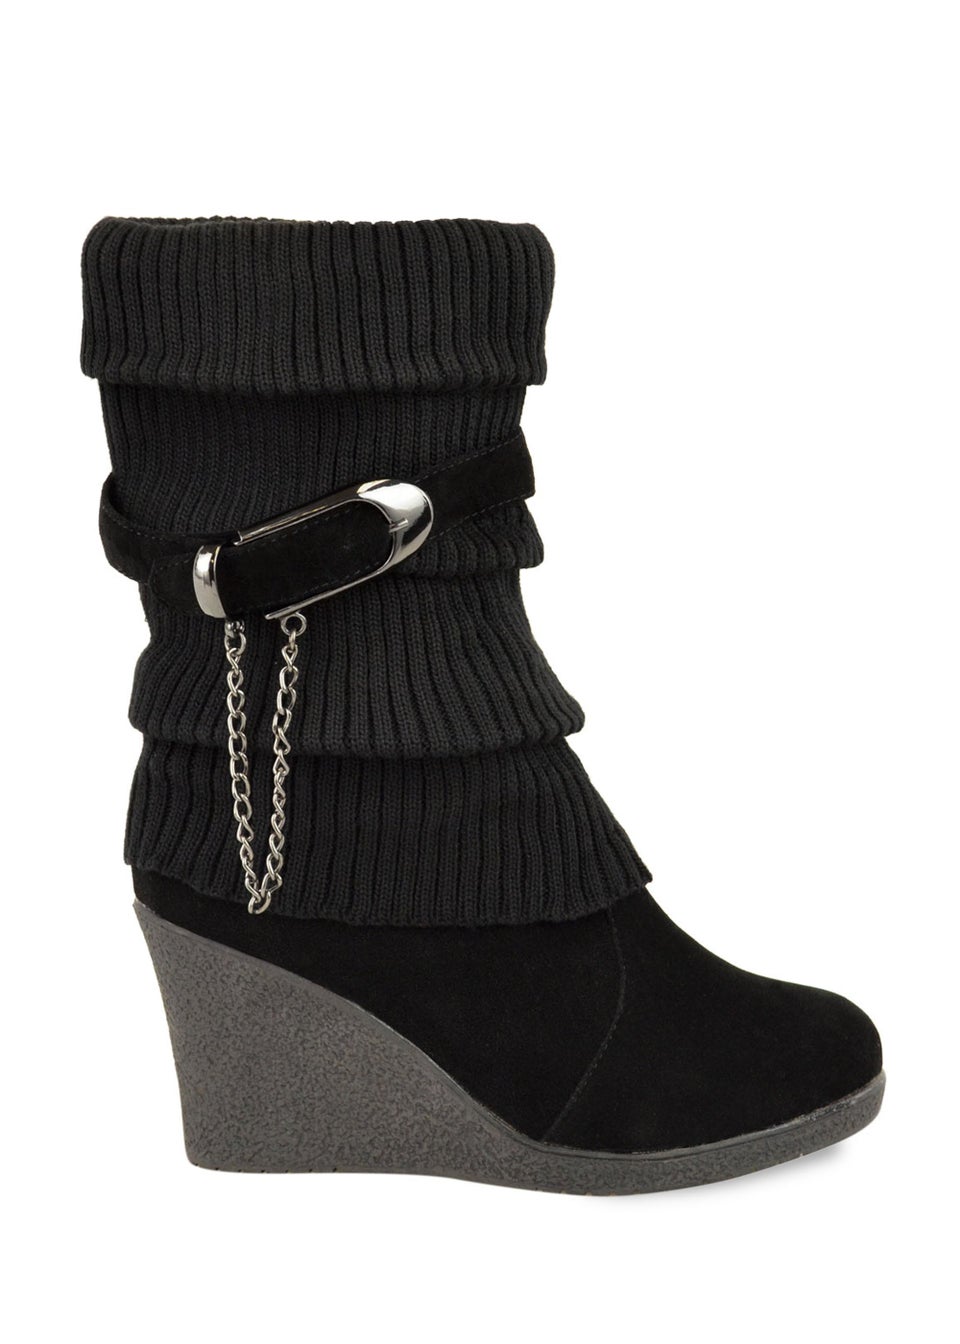 Where's That From Black Suede Bryony Wedge Heel Ankle Boots